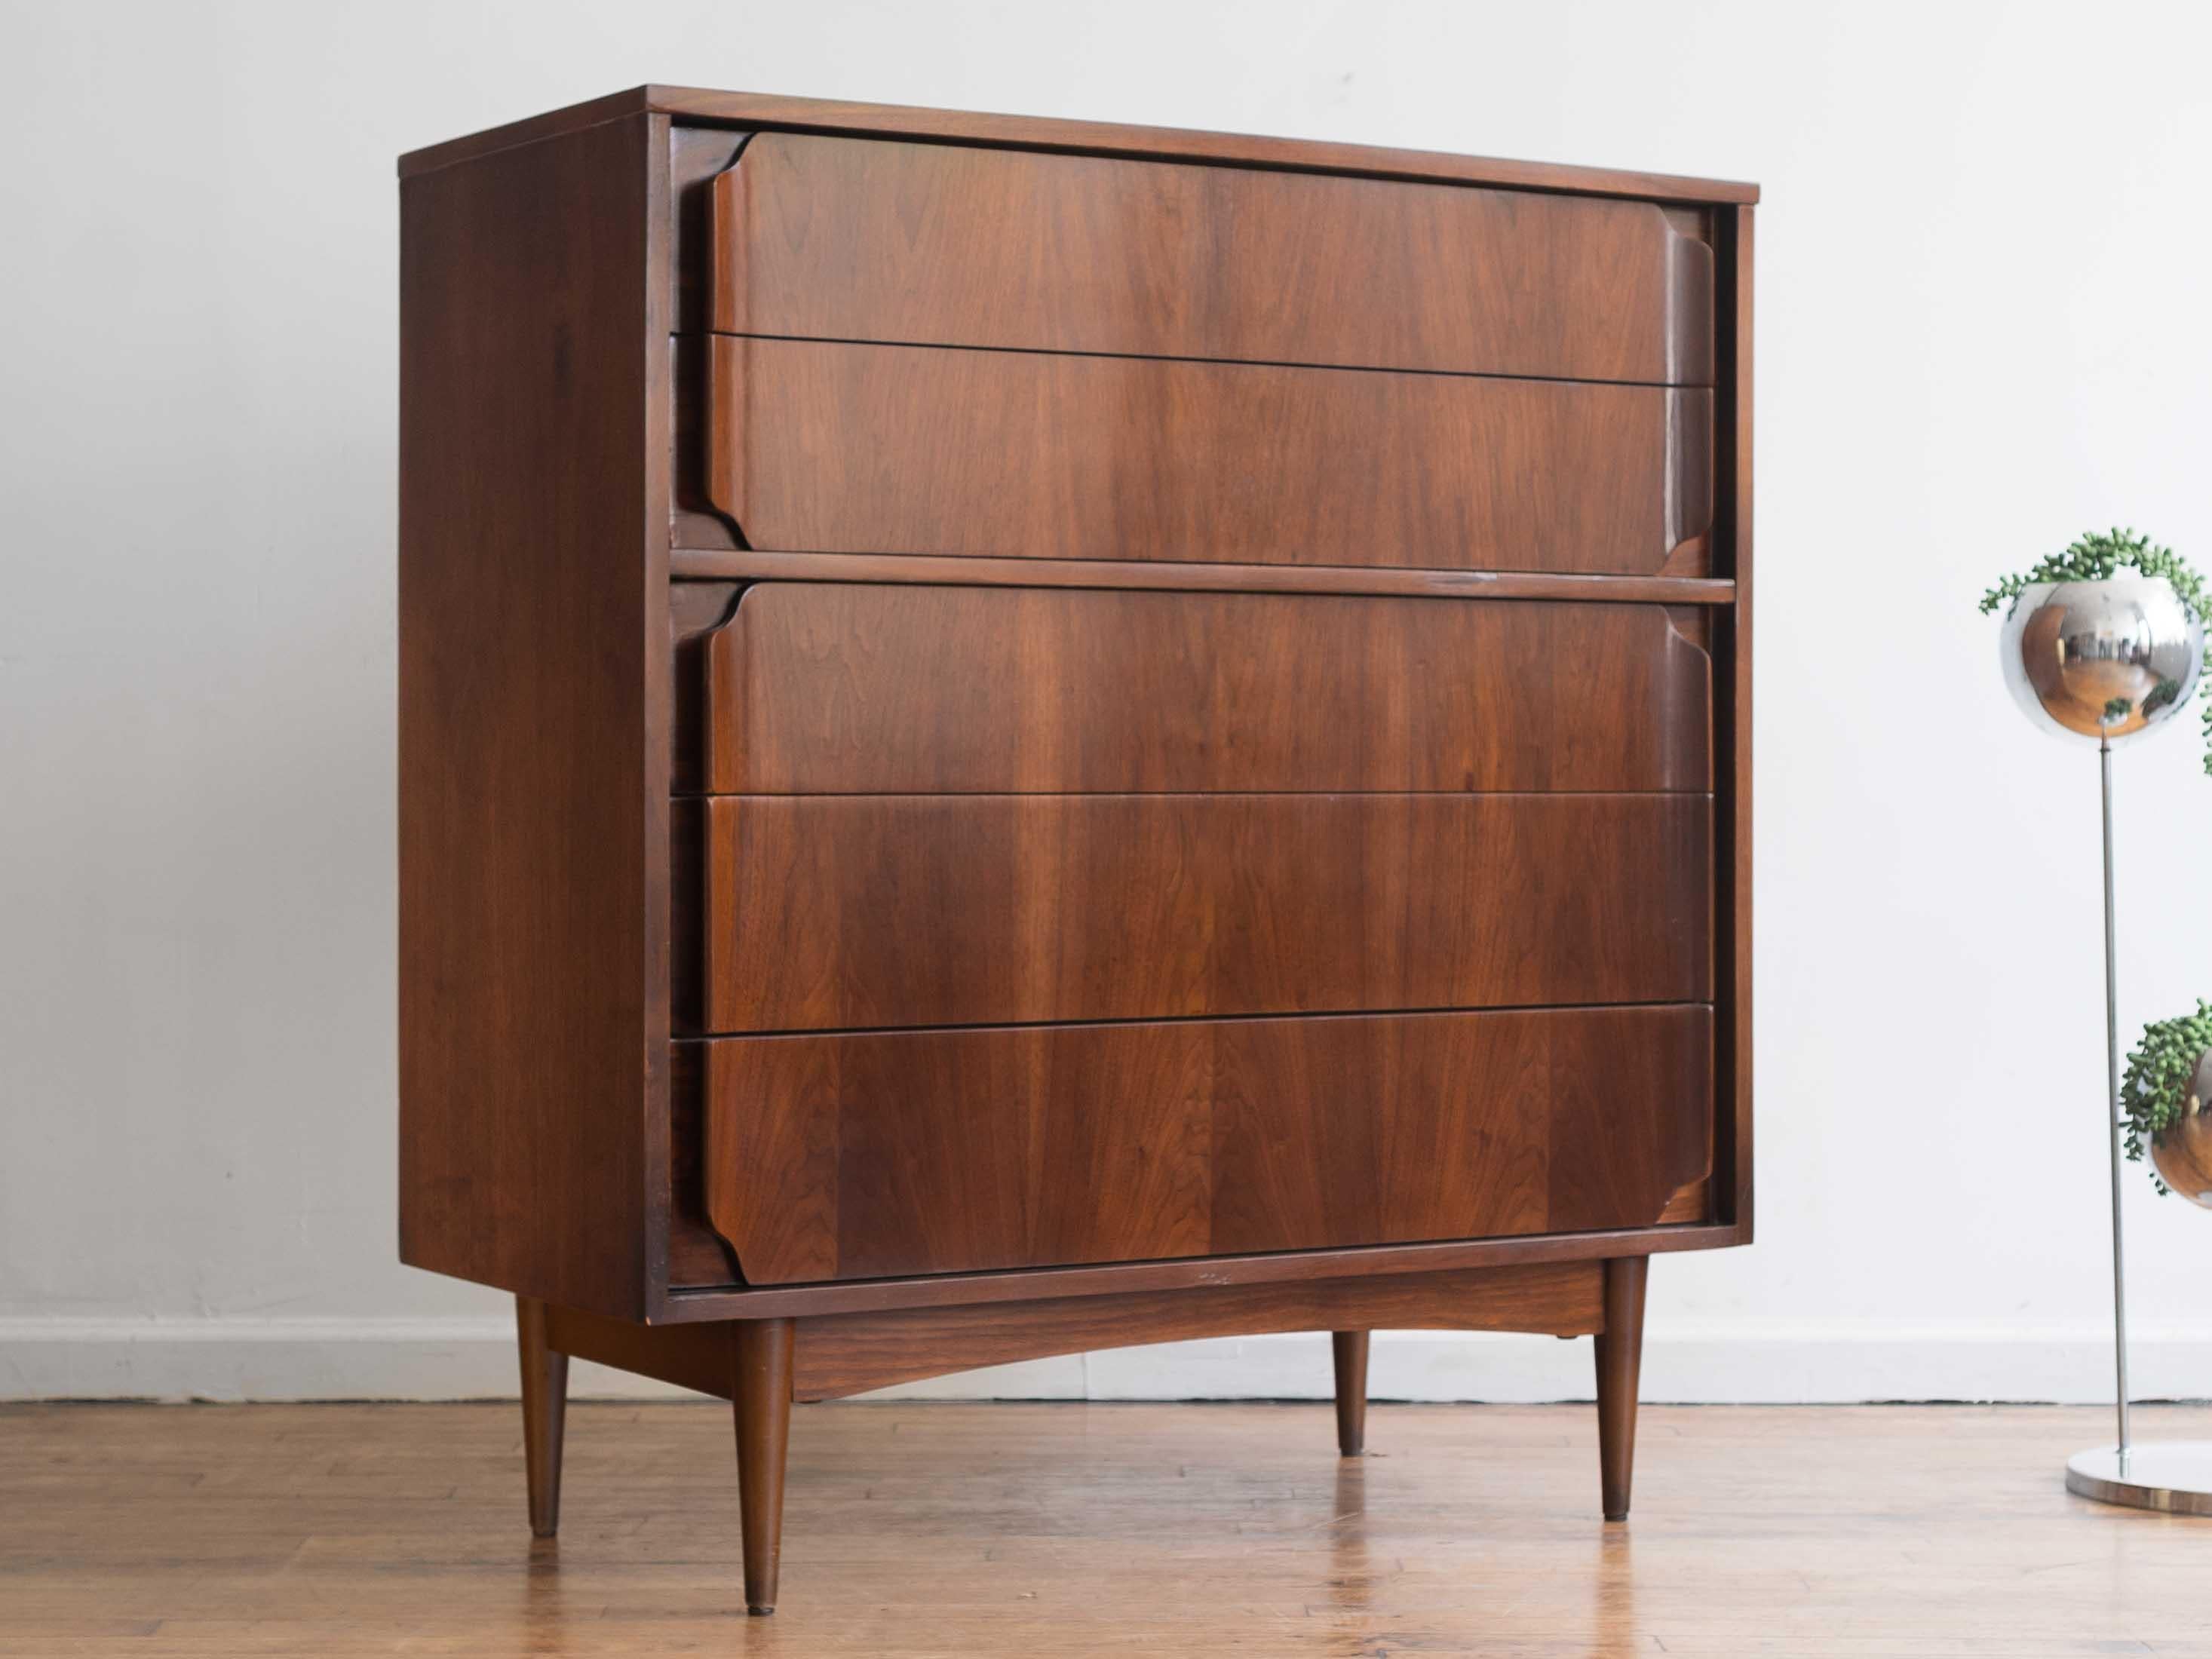 35” x 18” x 43.5”H

This vintage MCM Lane Rhythm highboy dresser is crafted from walnut and features five spacious drawers with full-length, curved wooden pulls and sits atop offset, tapered legs. 

This piece has been carefully restored and is